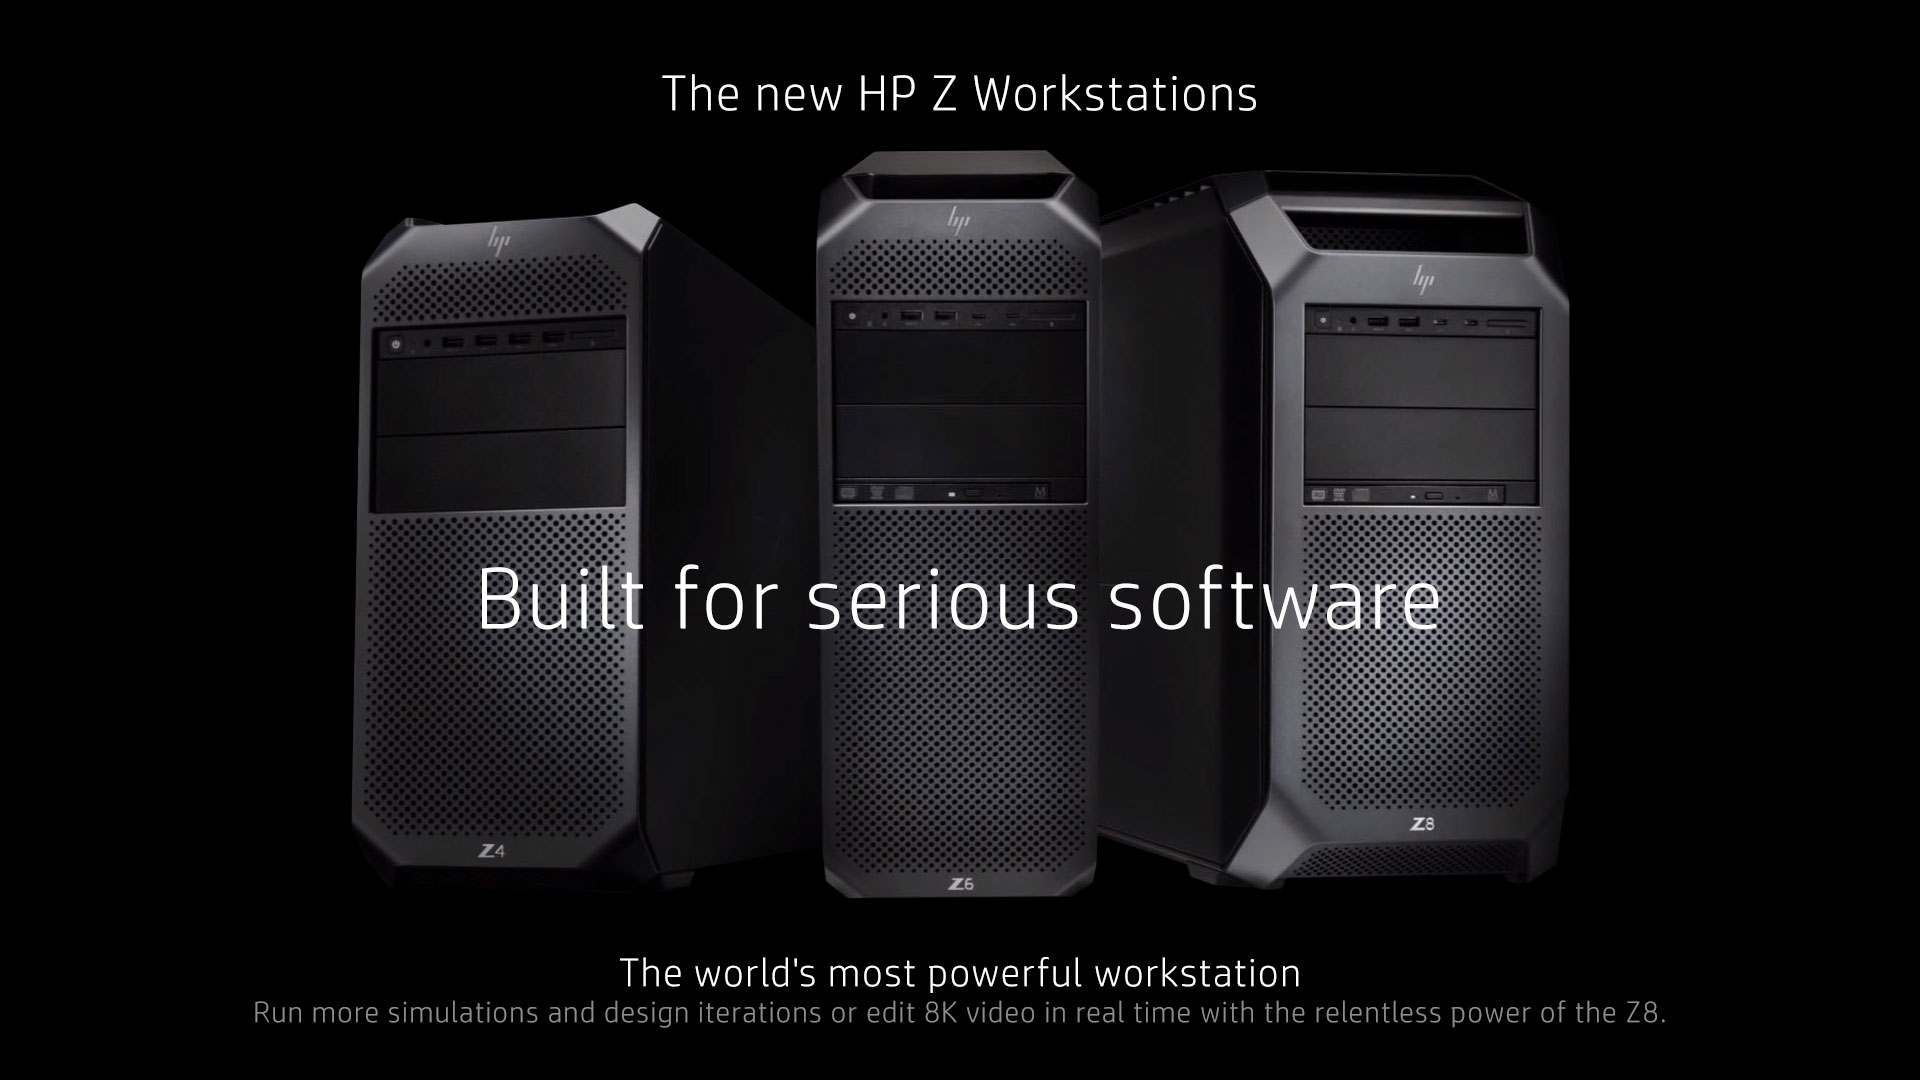 New HP Workstations